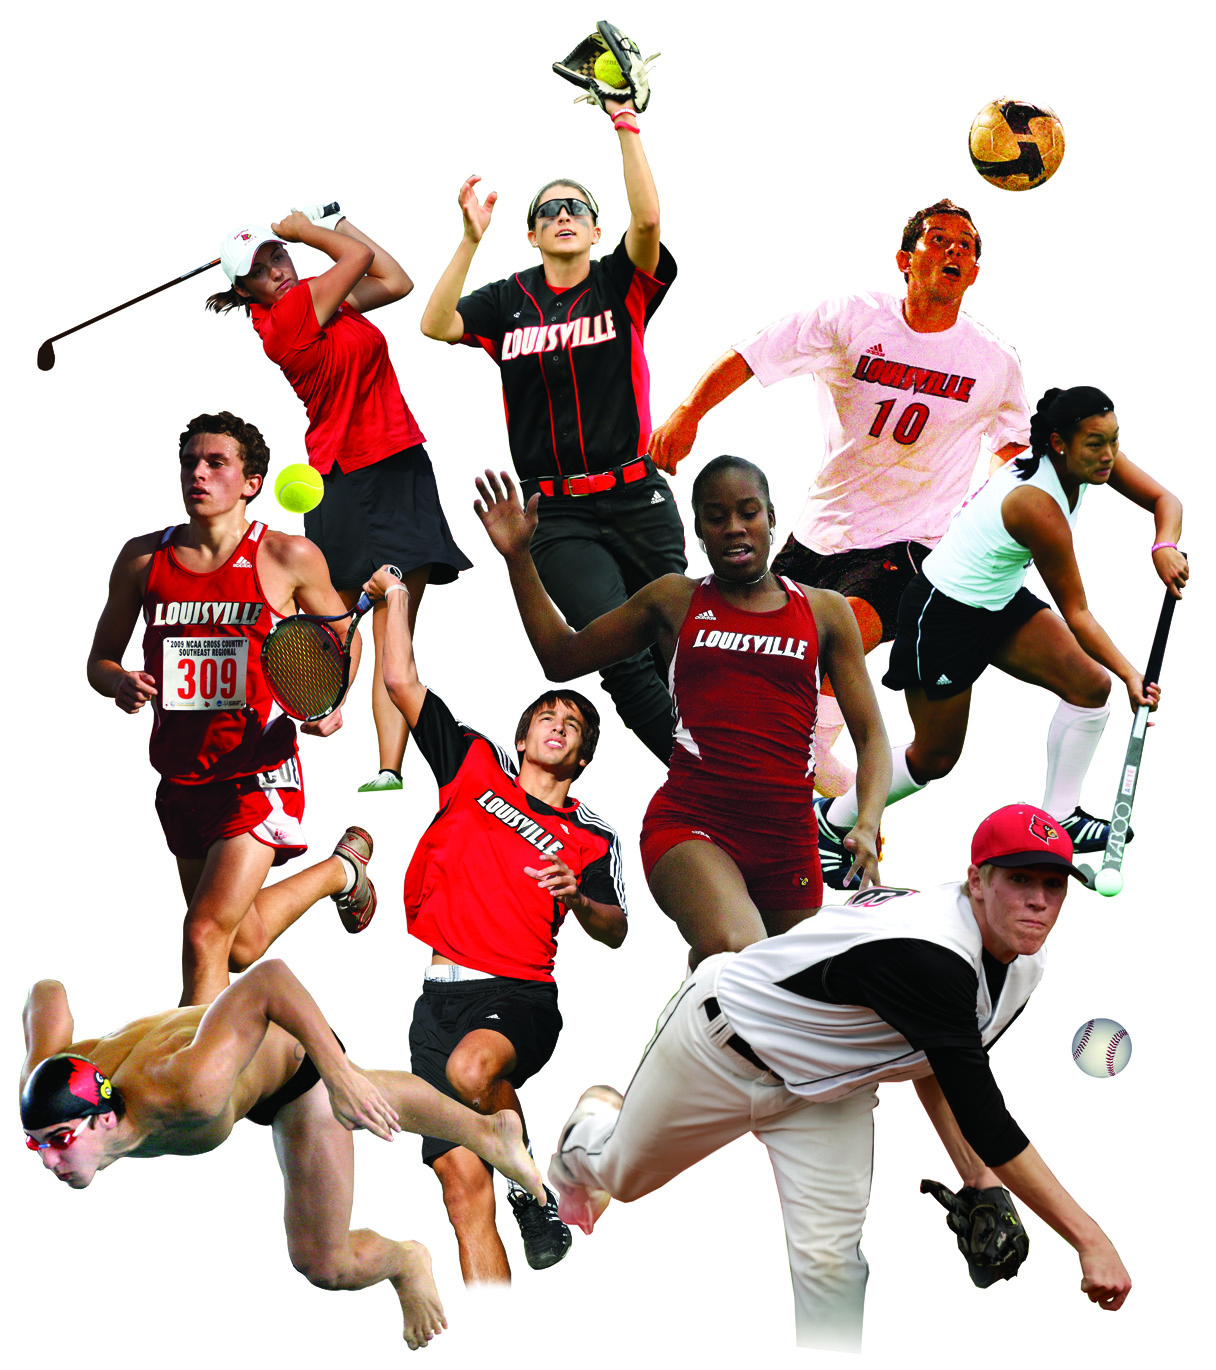 Download this Uofl Sports Traditions picture